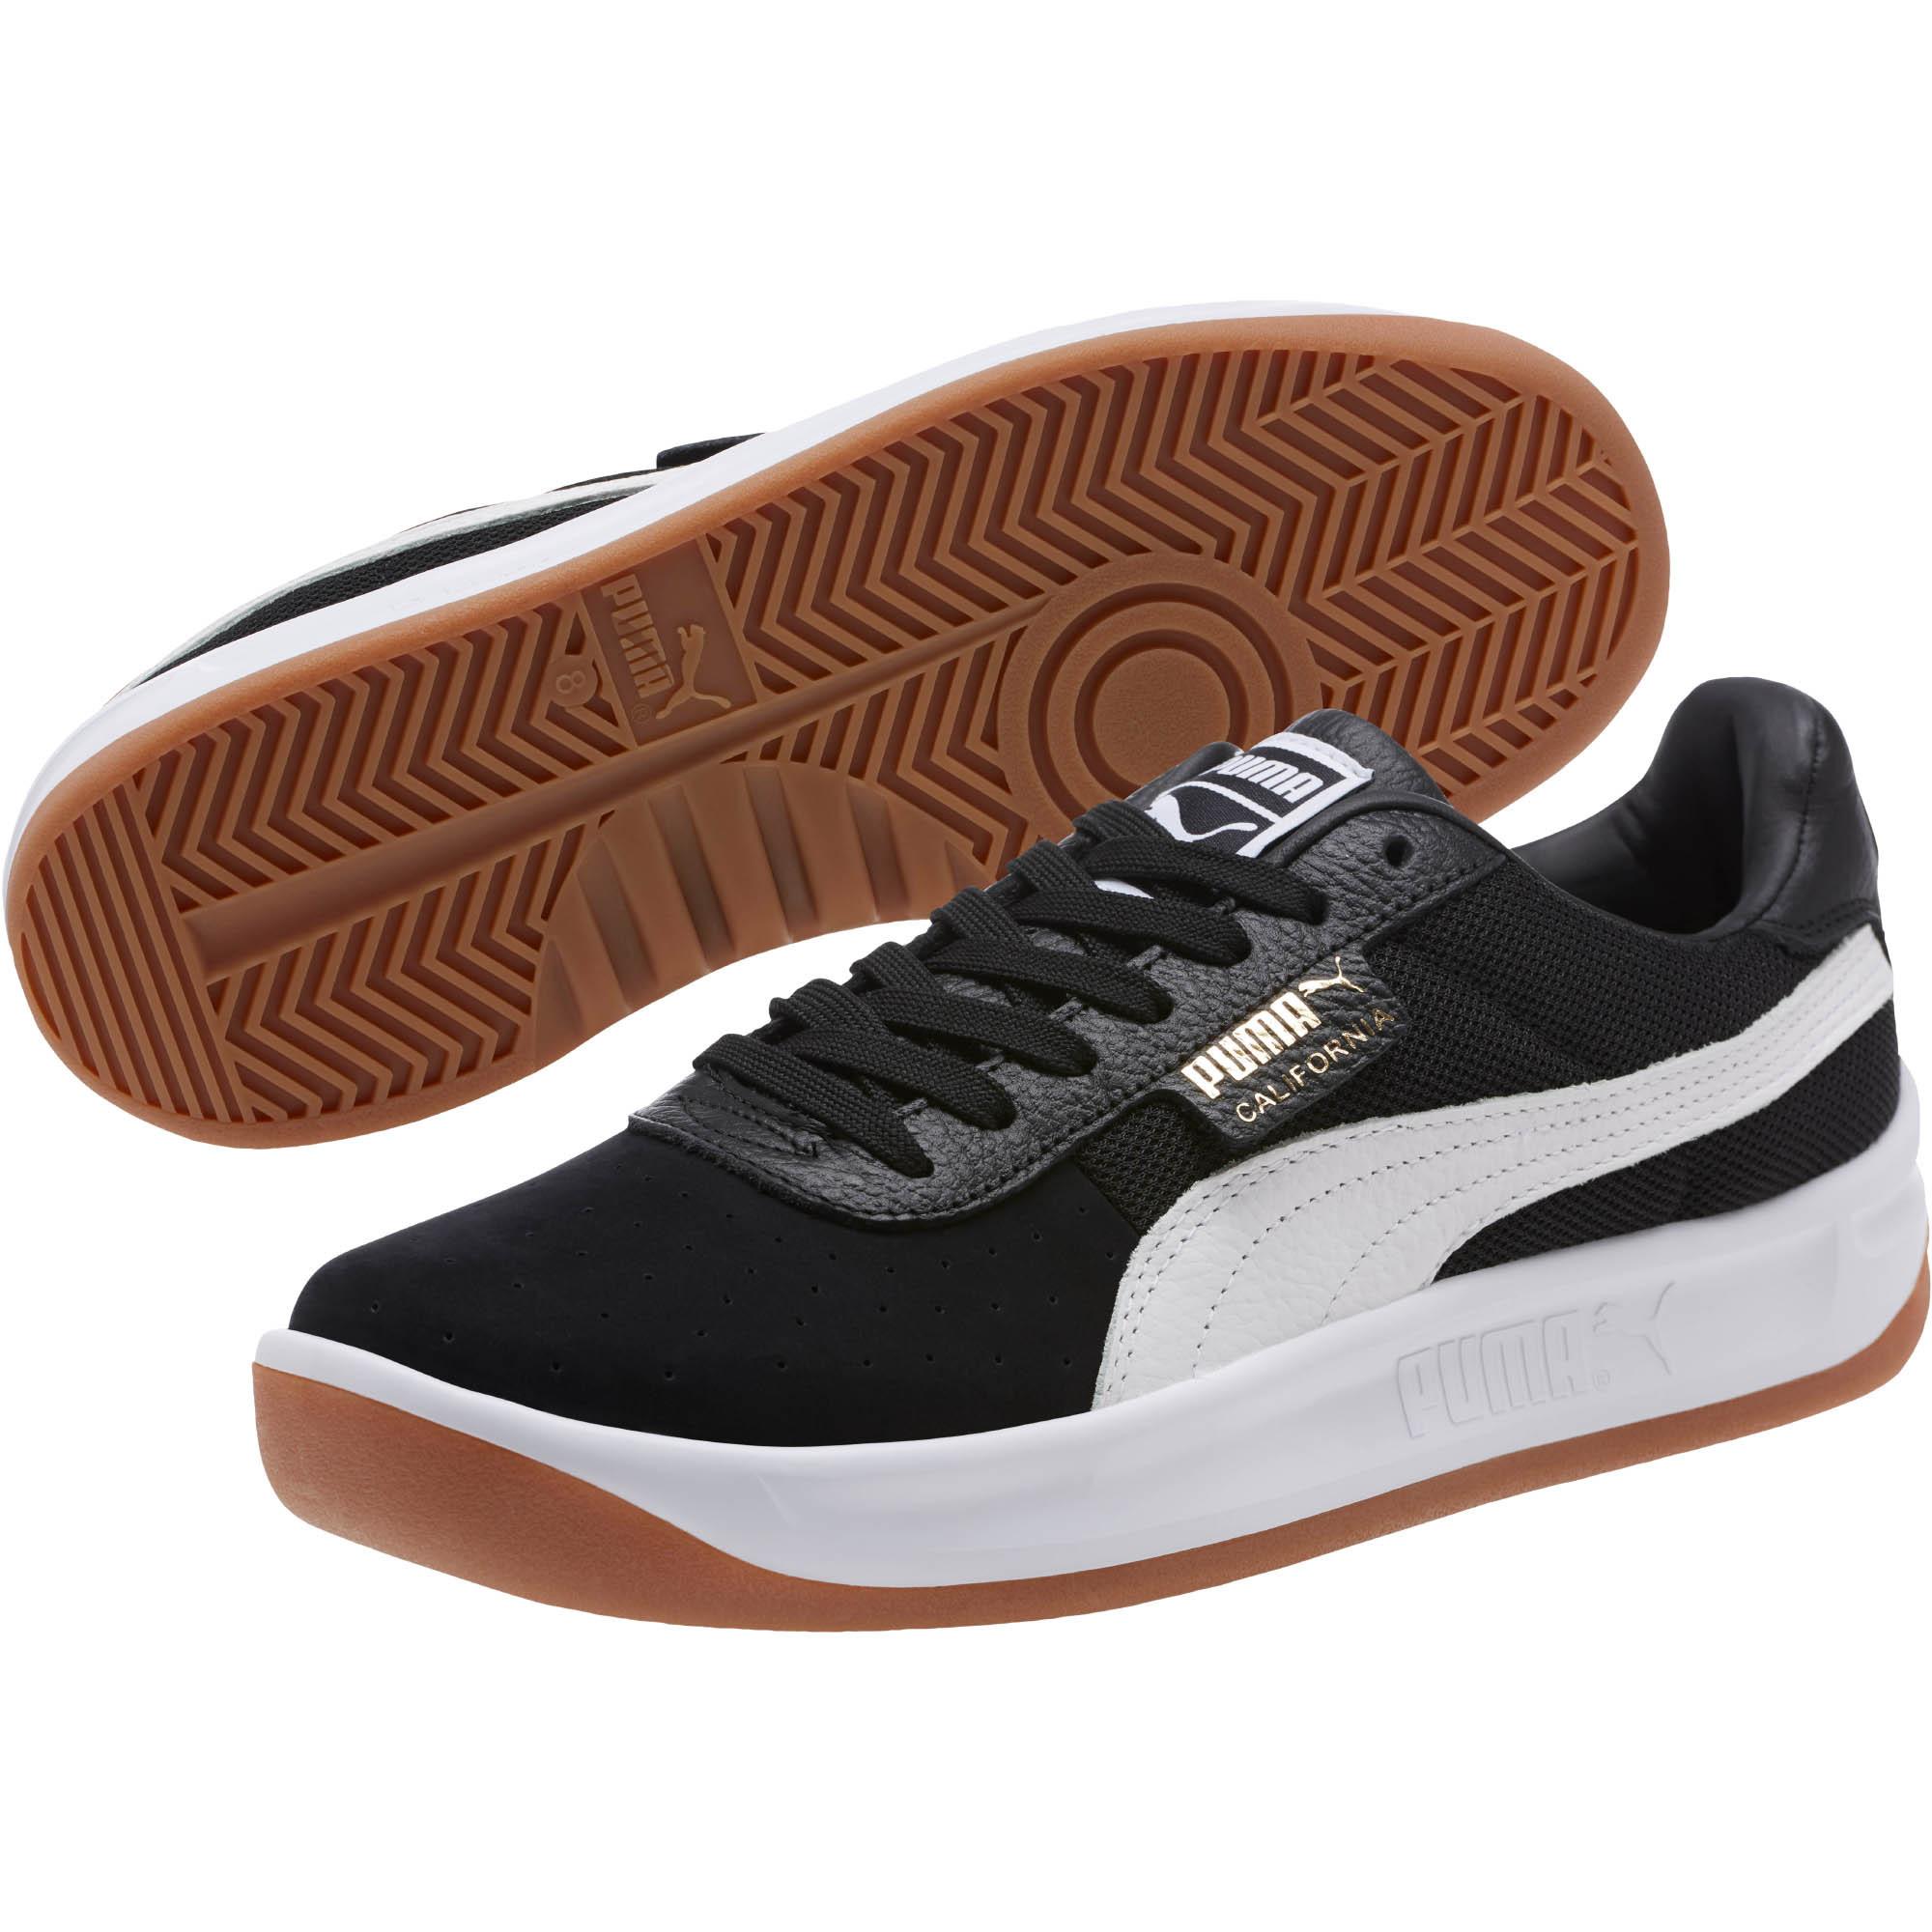 PUMA Leather California Casual Sneakers in 06 (Black) for Men - Lyst